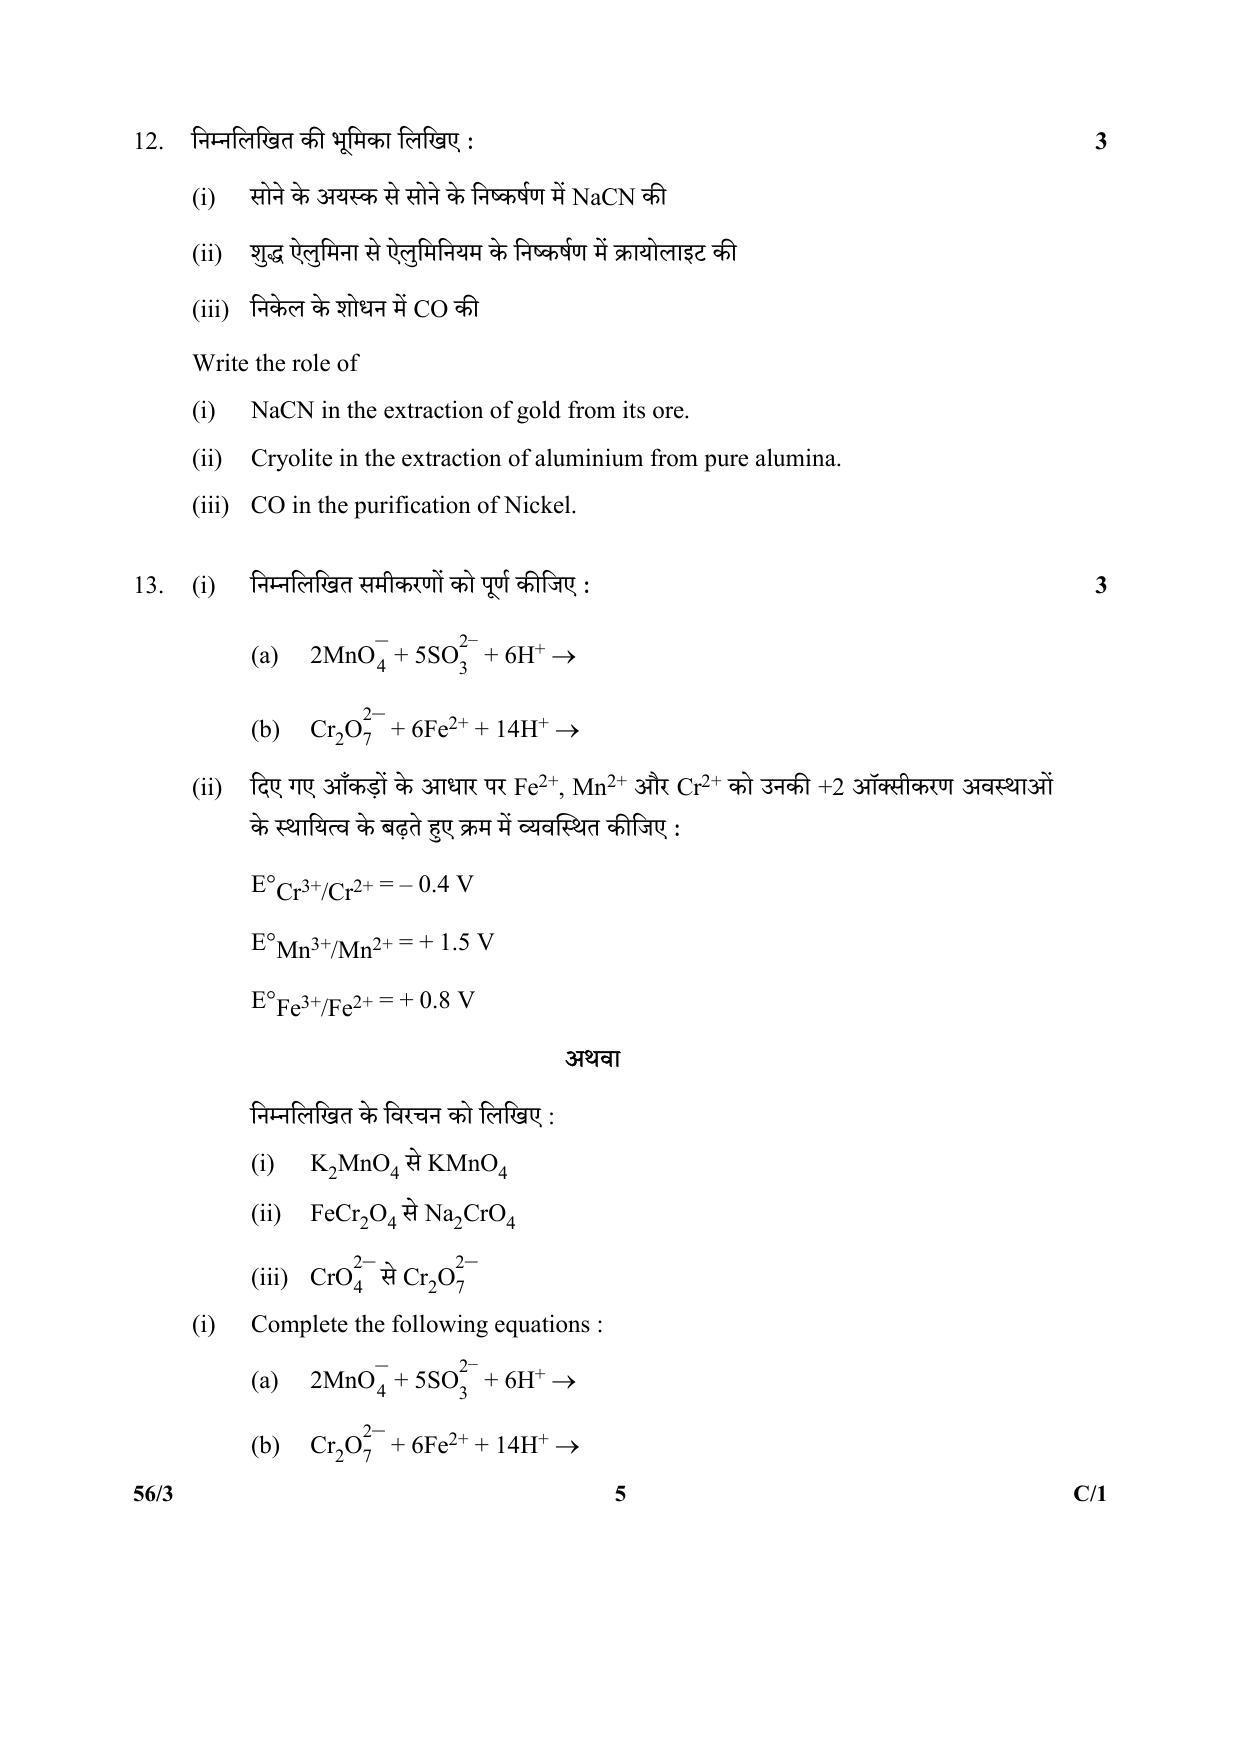 CBSE Class 12 56-3 (Chemistry) 2018 Compartment Question Paper - Page 5